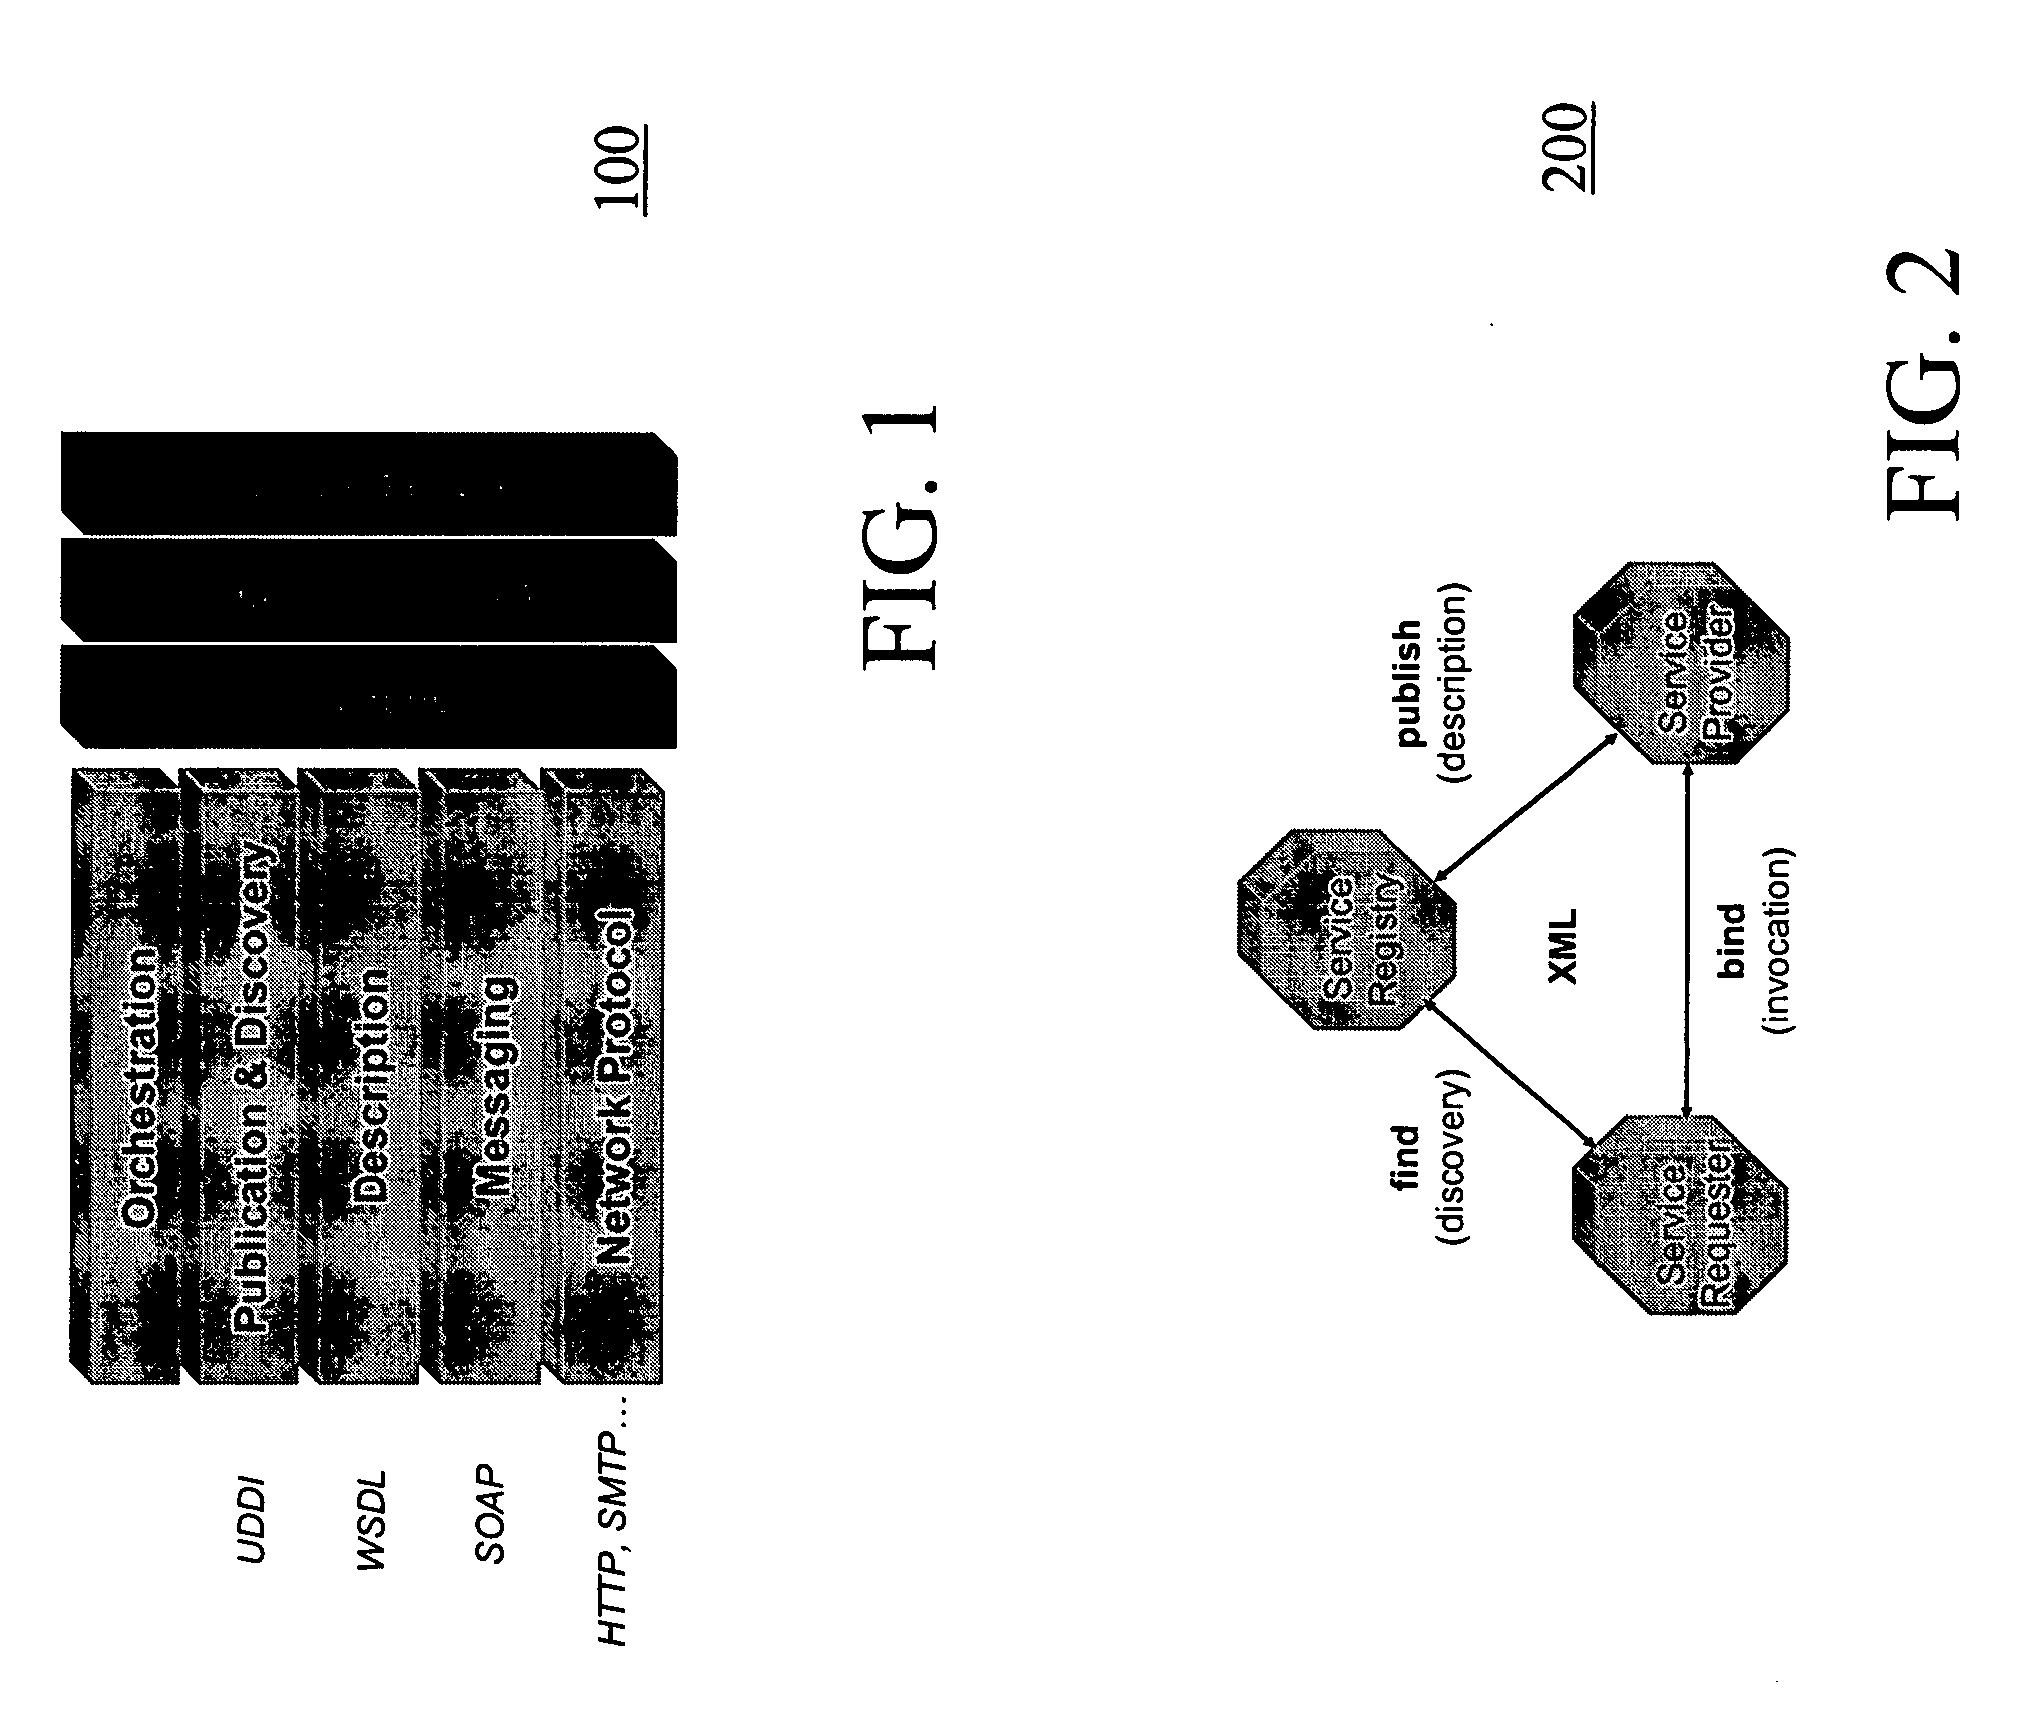 System and method securing web services